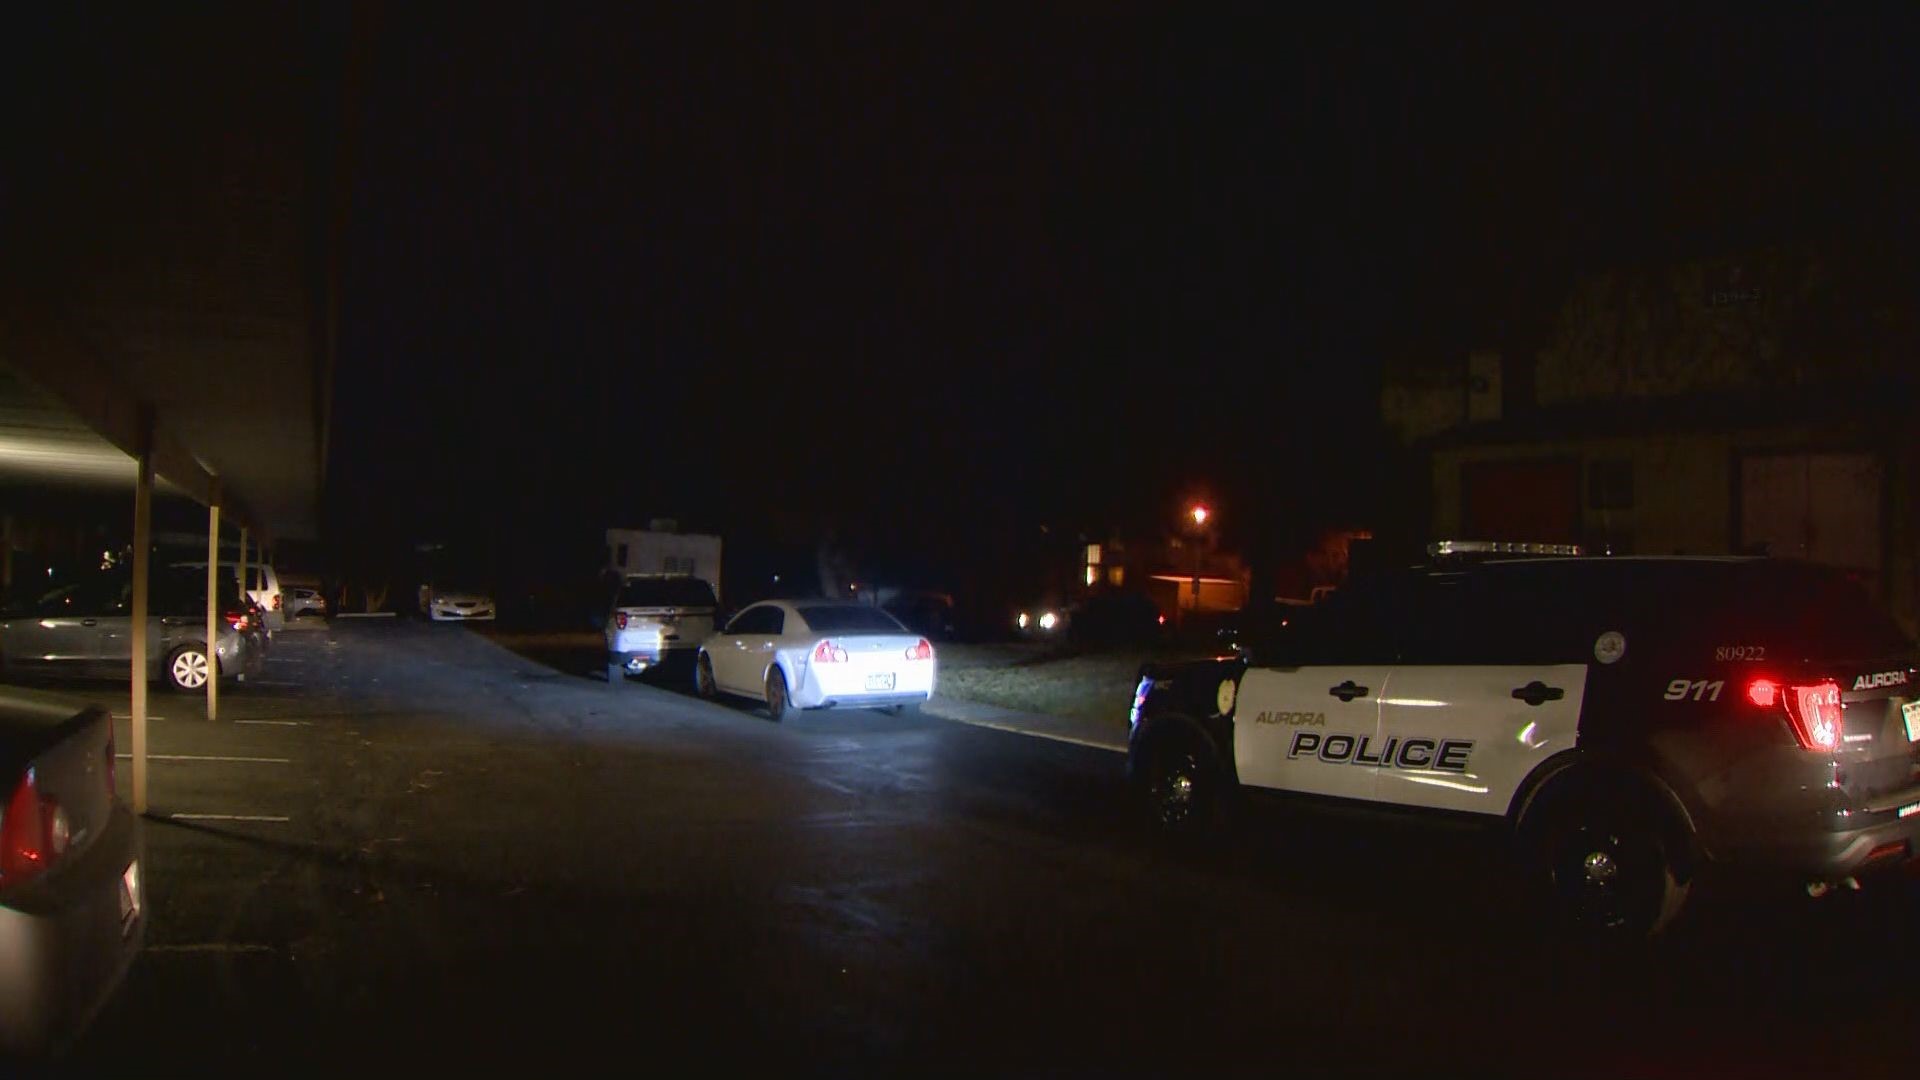 One person is dead after what police in Aurora described as a "large disturbance" on Monday evening. The area where the disturbance was reported is near the intersection of South Havana Street and East Jewell Avenue.